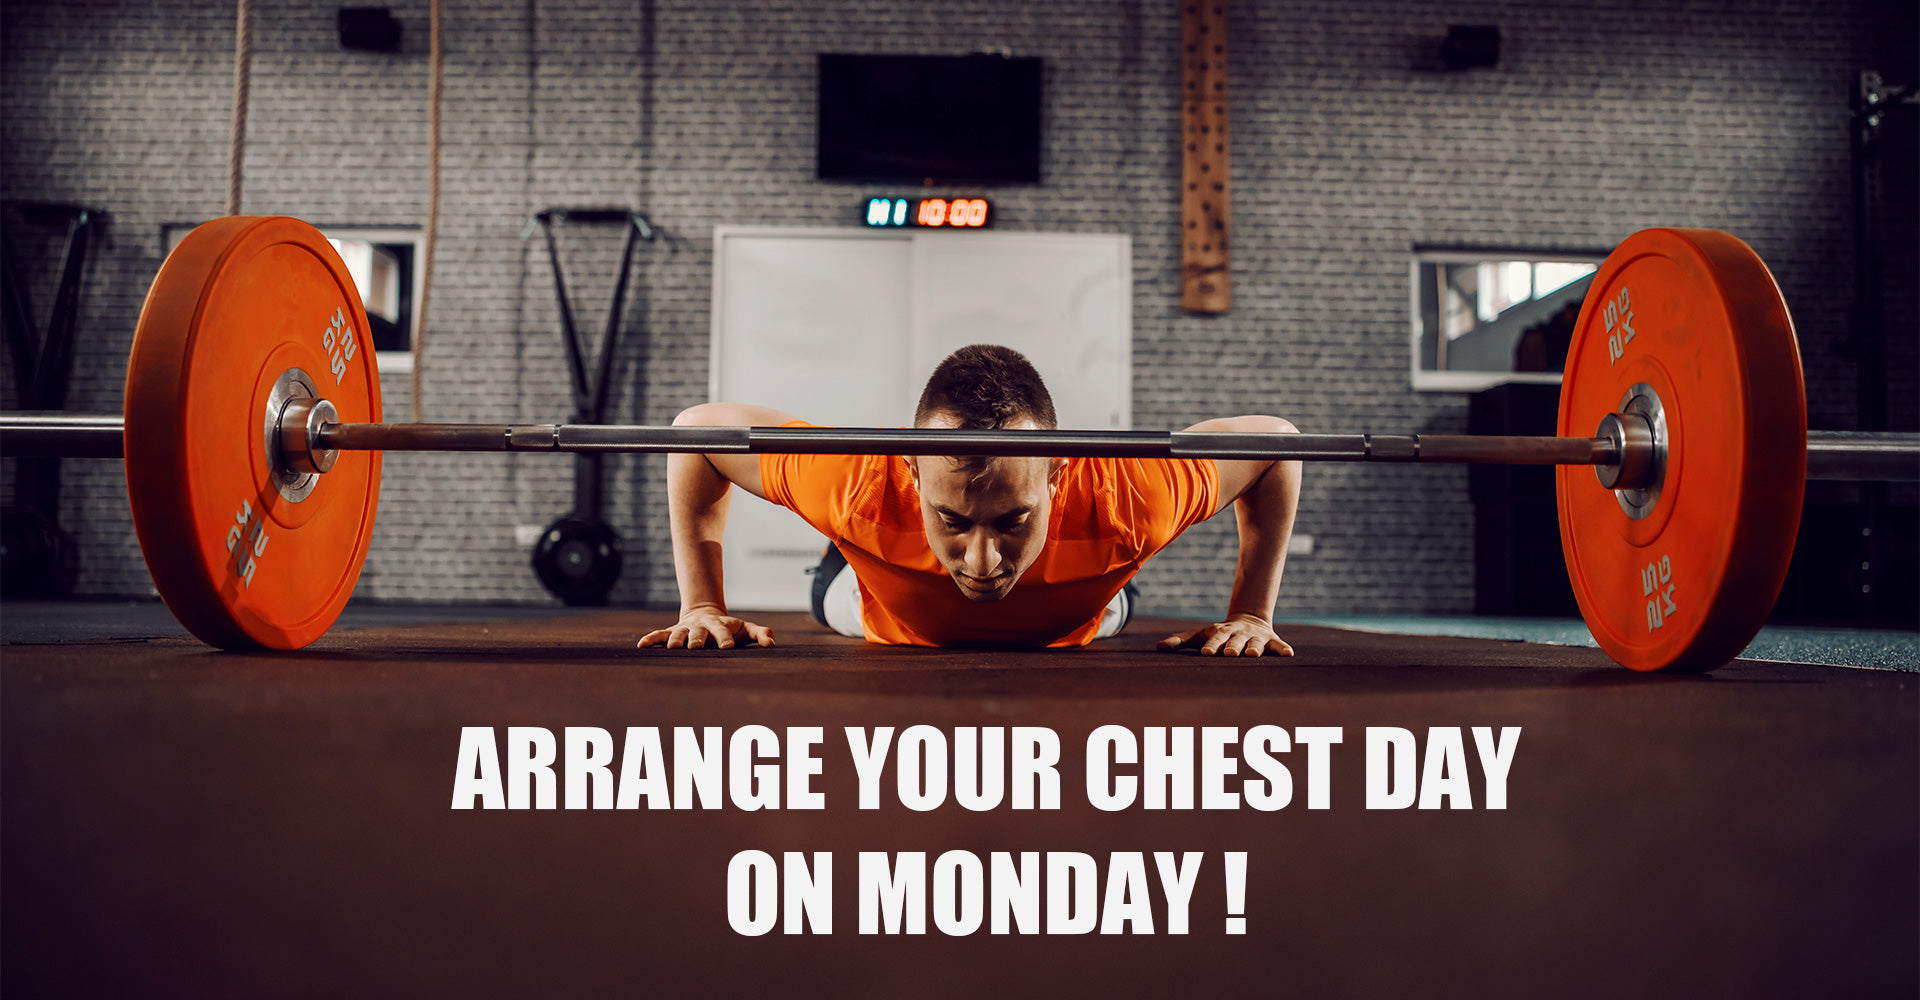 Arrange Your Chest Day on Monday - Fitness Tips and Workout Plan